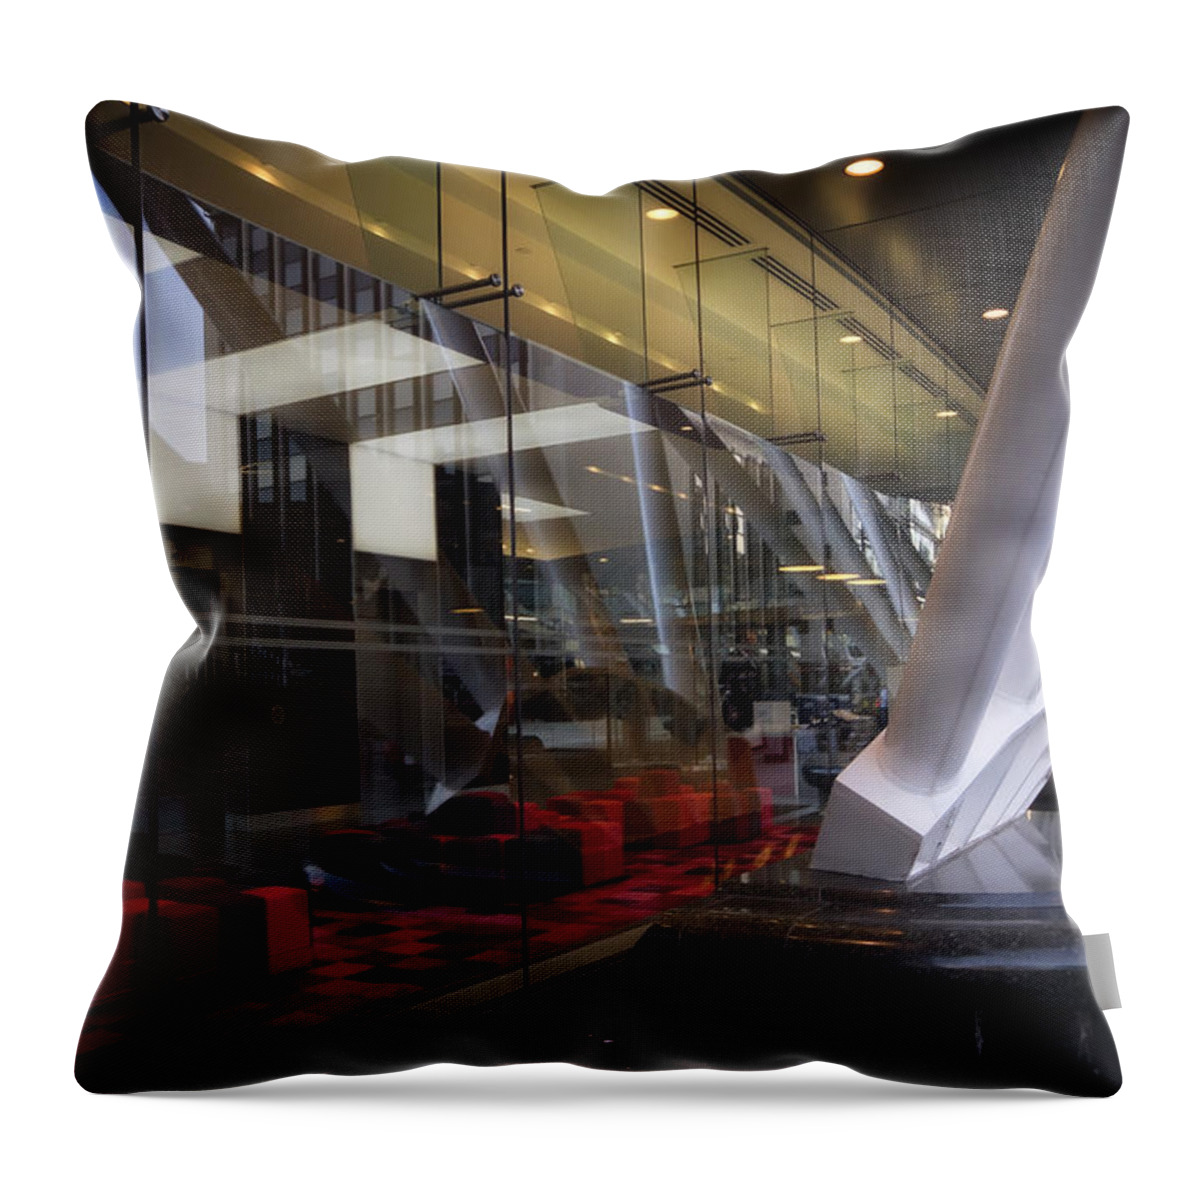 Facade Throw Pillow featuring the photograph Thames Link Station by Shirley Mitchell